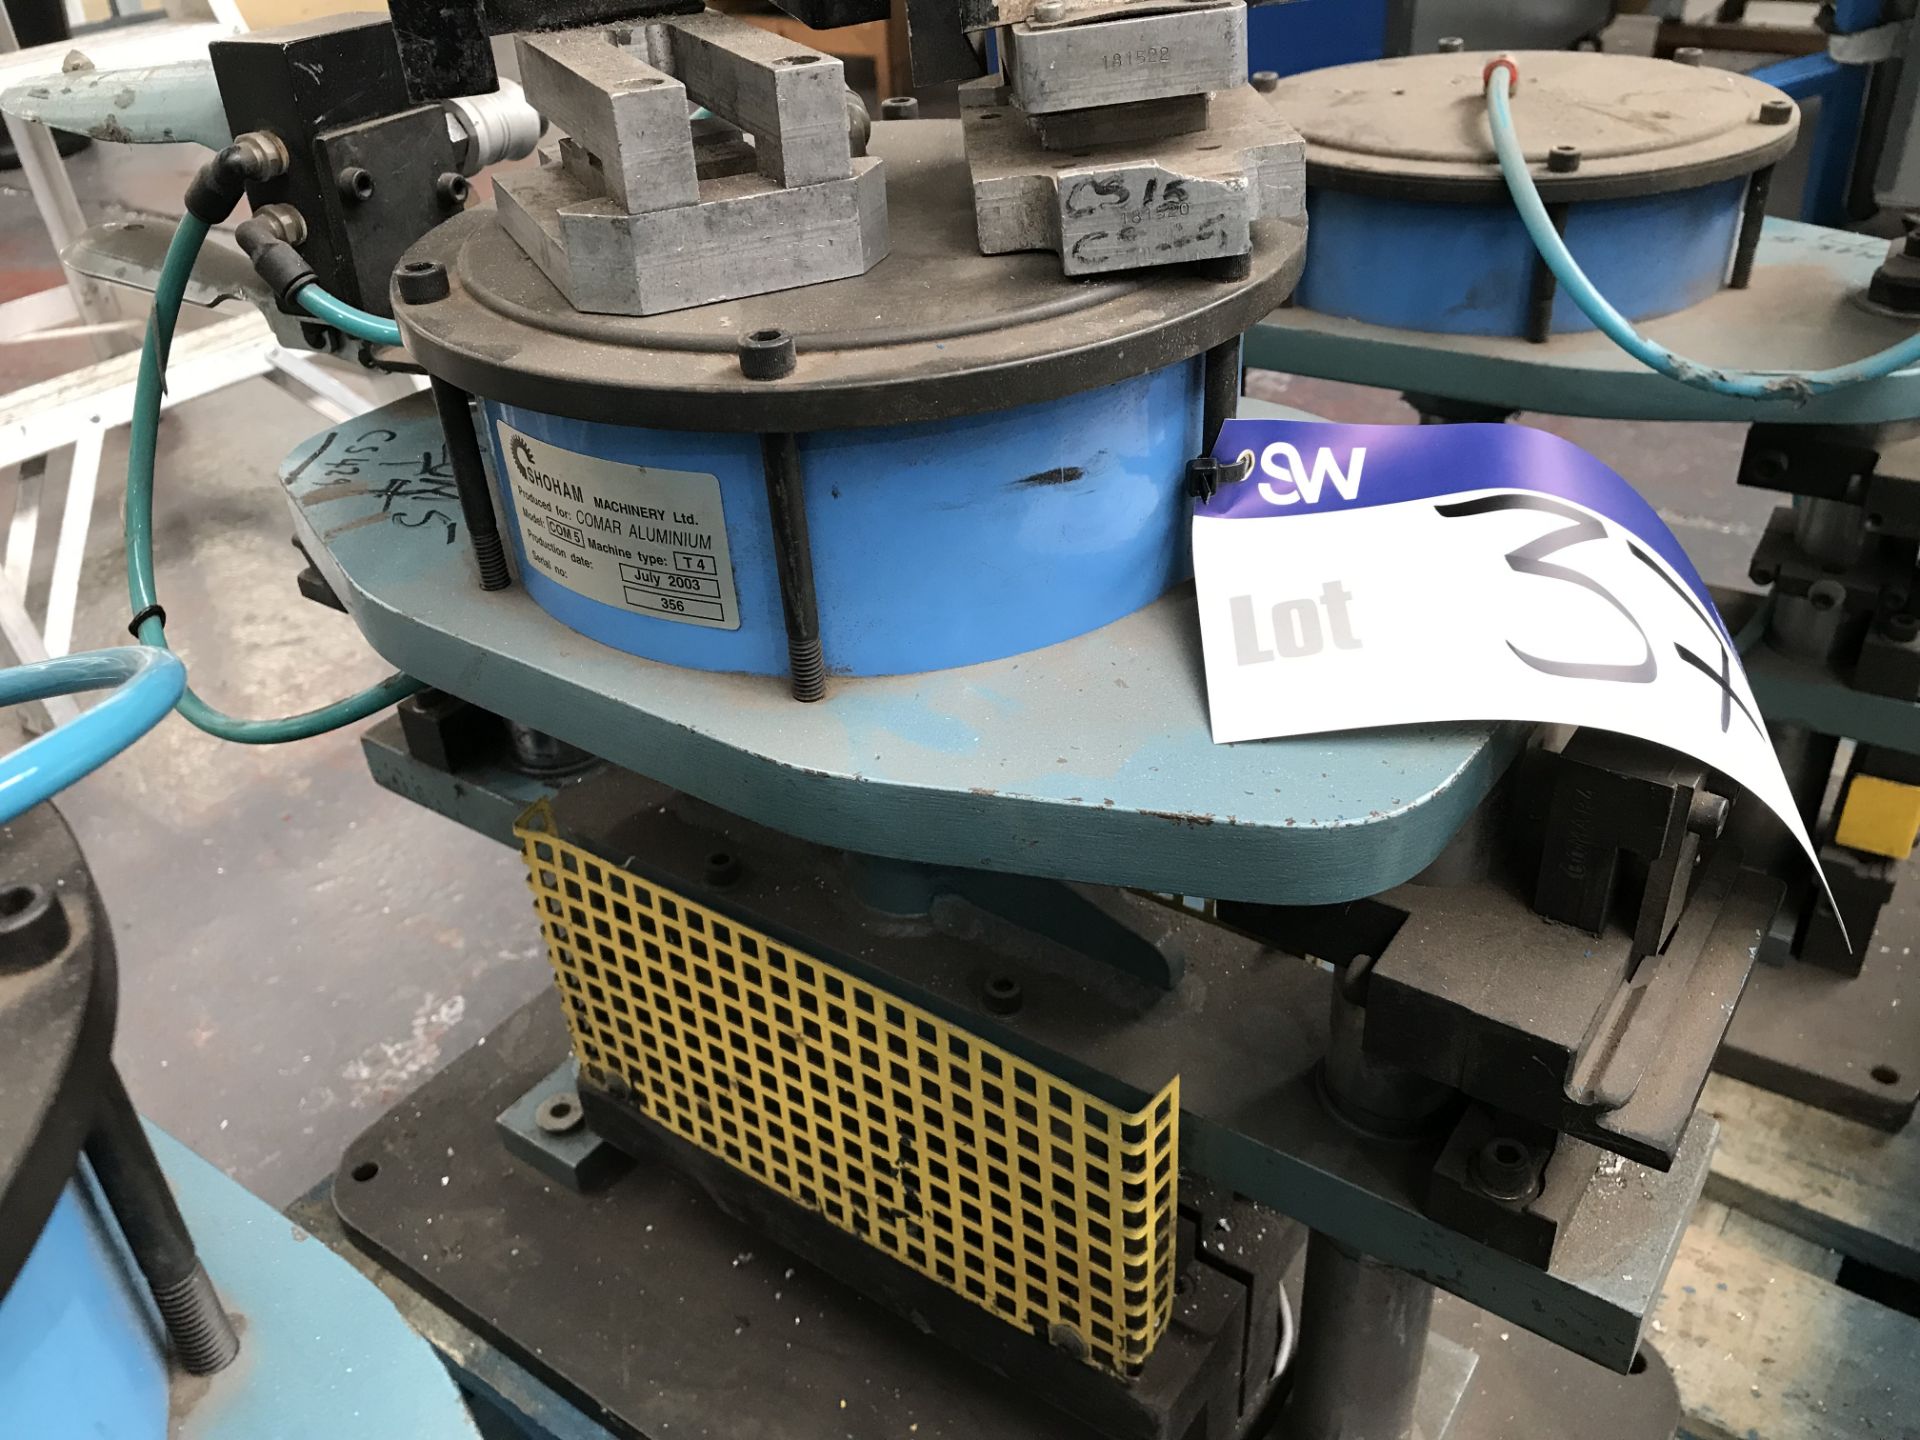 Shoham Pneumatic Punch Tool, Model COM5 Type T4, serial no. 356, year of manufacture 2003Please read